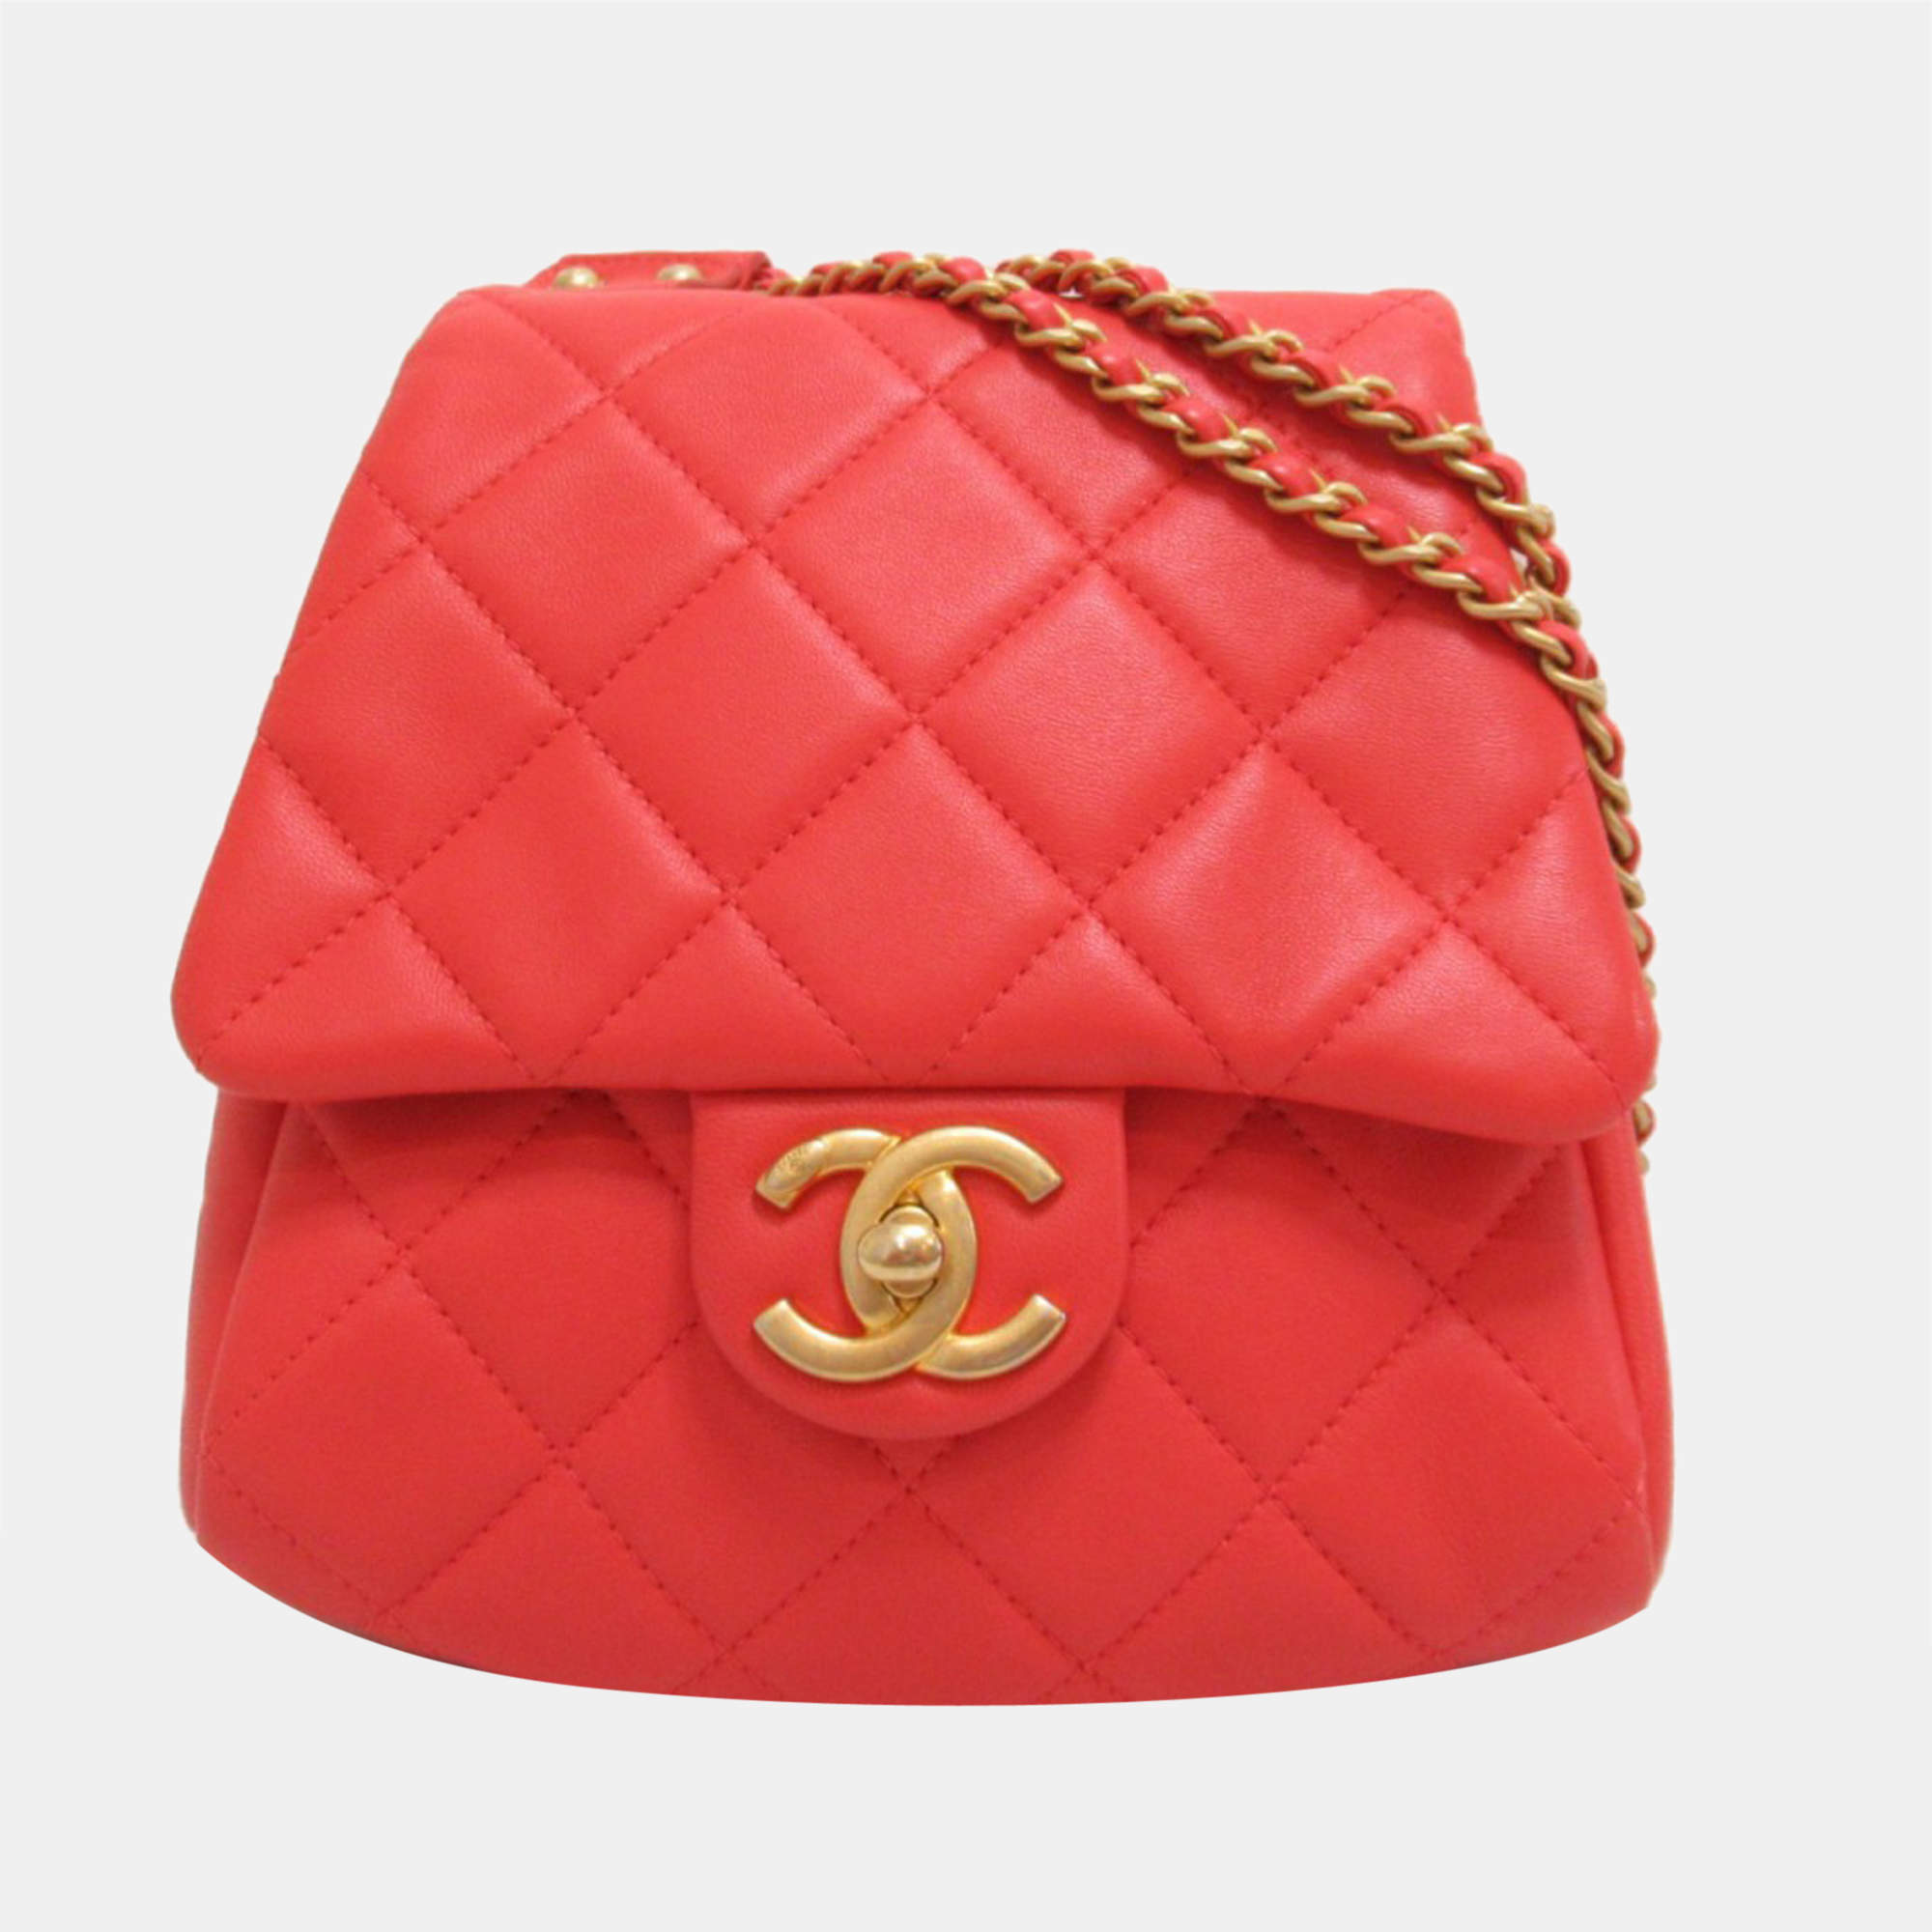  Chanel, Pre-Loved Red Quilted Calfskin Top Handle Boy